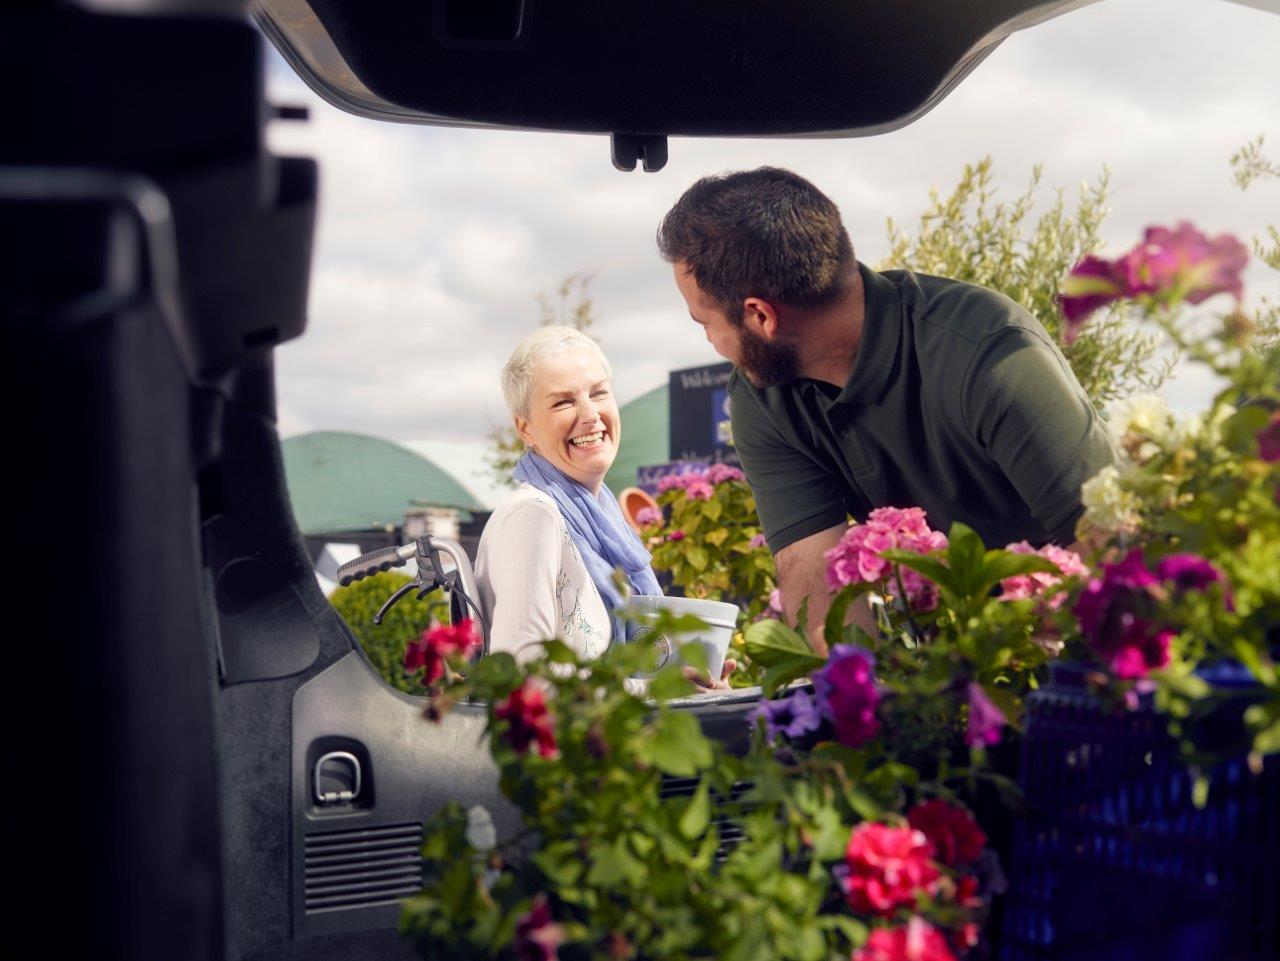 Man helping lady put plants in the back of her car